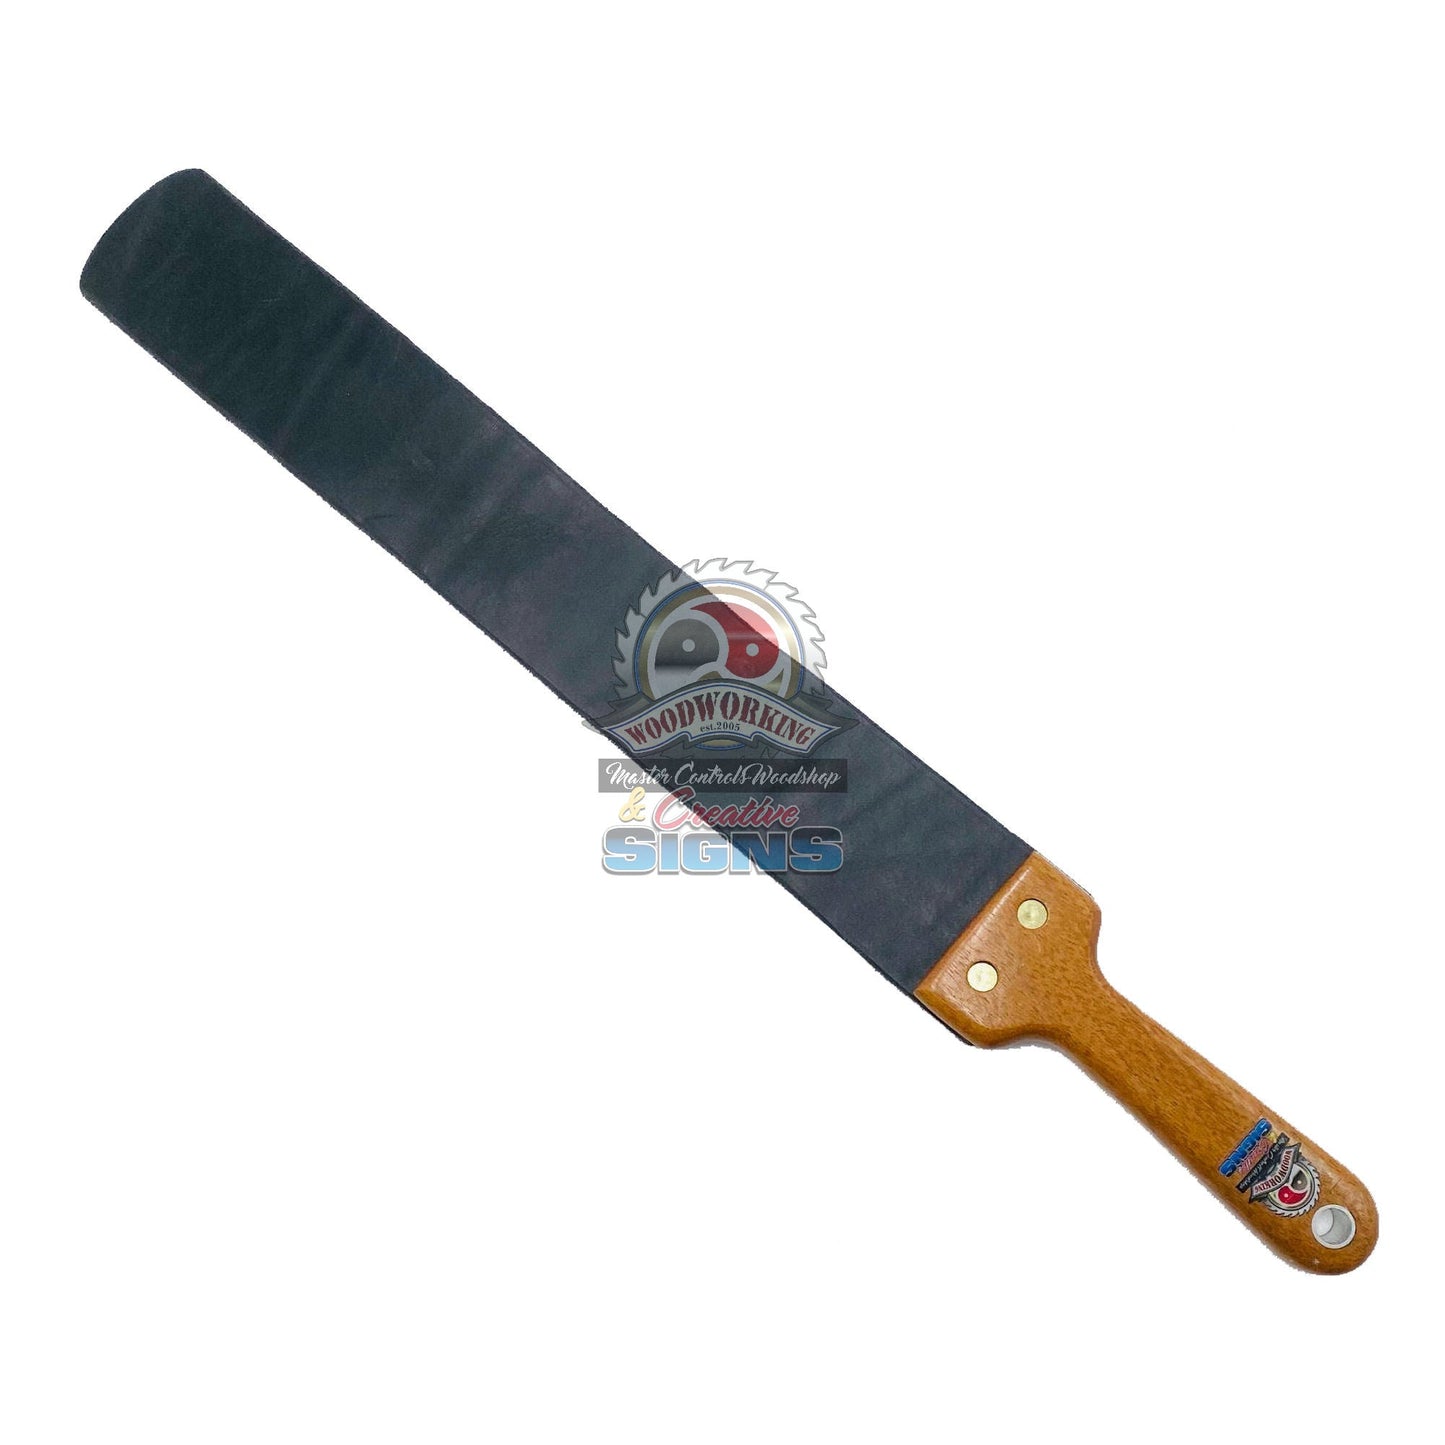 Master Control's Woodshop & Toys's Italian Leather Barber Strap - Medium - This is a Handmade upon order product. The product usually takes 7-10 days to create. This Italian Leather Barber Strap Spanking Paddle never fails to get an "ouch" of appreciation